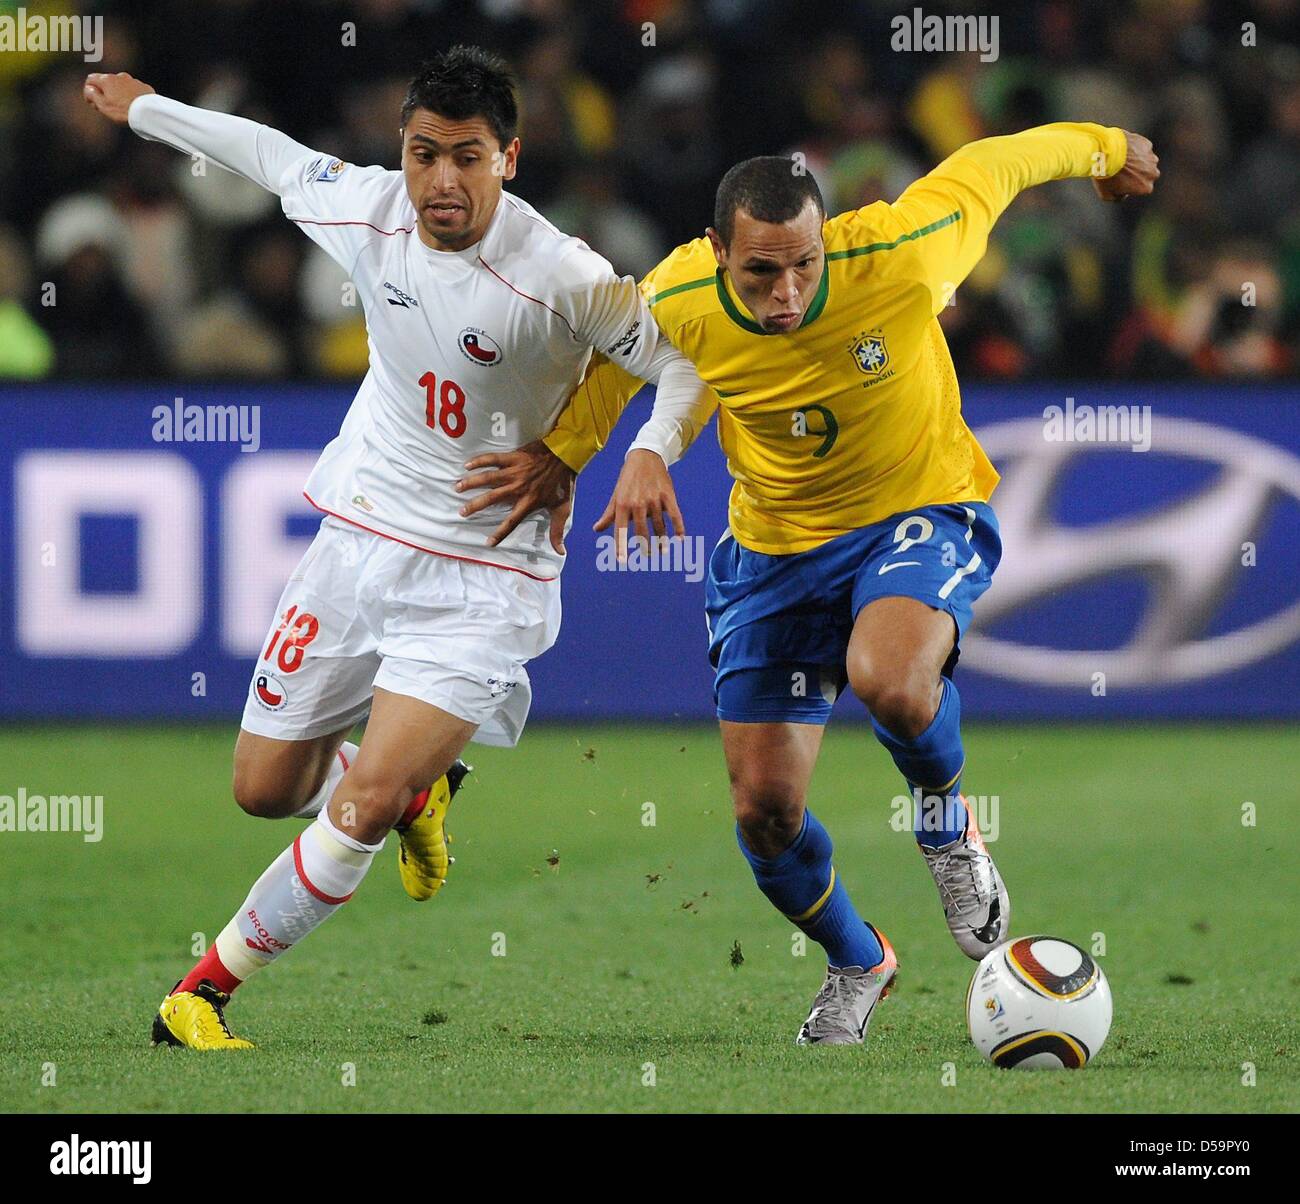 Brazil's Luis Fabiano (R) vies for the ball with Chile's Gonzalo Jara during the 2010 FIFA World Cup Round of Sixteen match between Brazil and Chile at the Ellis Park Stadium in Johannesburg, South Africa 28 June 2010. Photo: Marcus Brandt dpa - Please refer to http://dpaq.de/FIFA-WM2010-TC Stock Photo